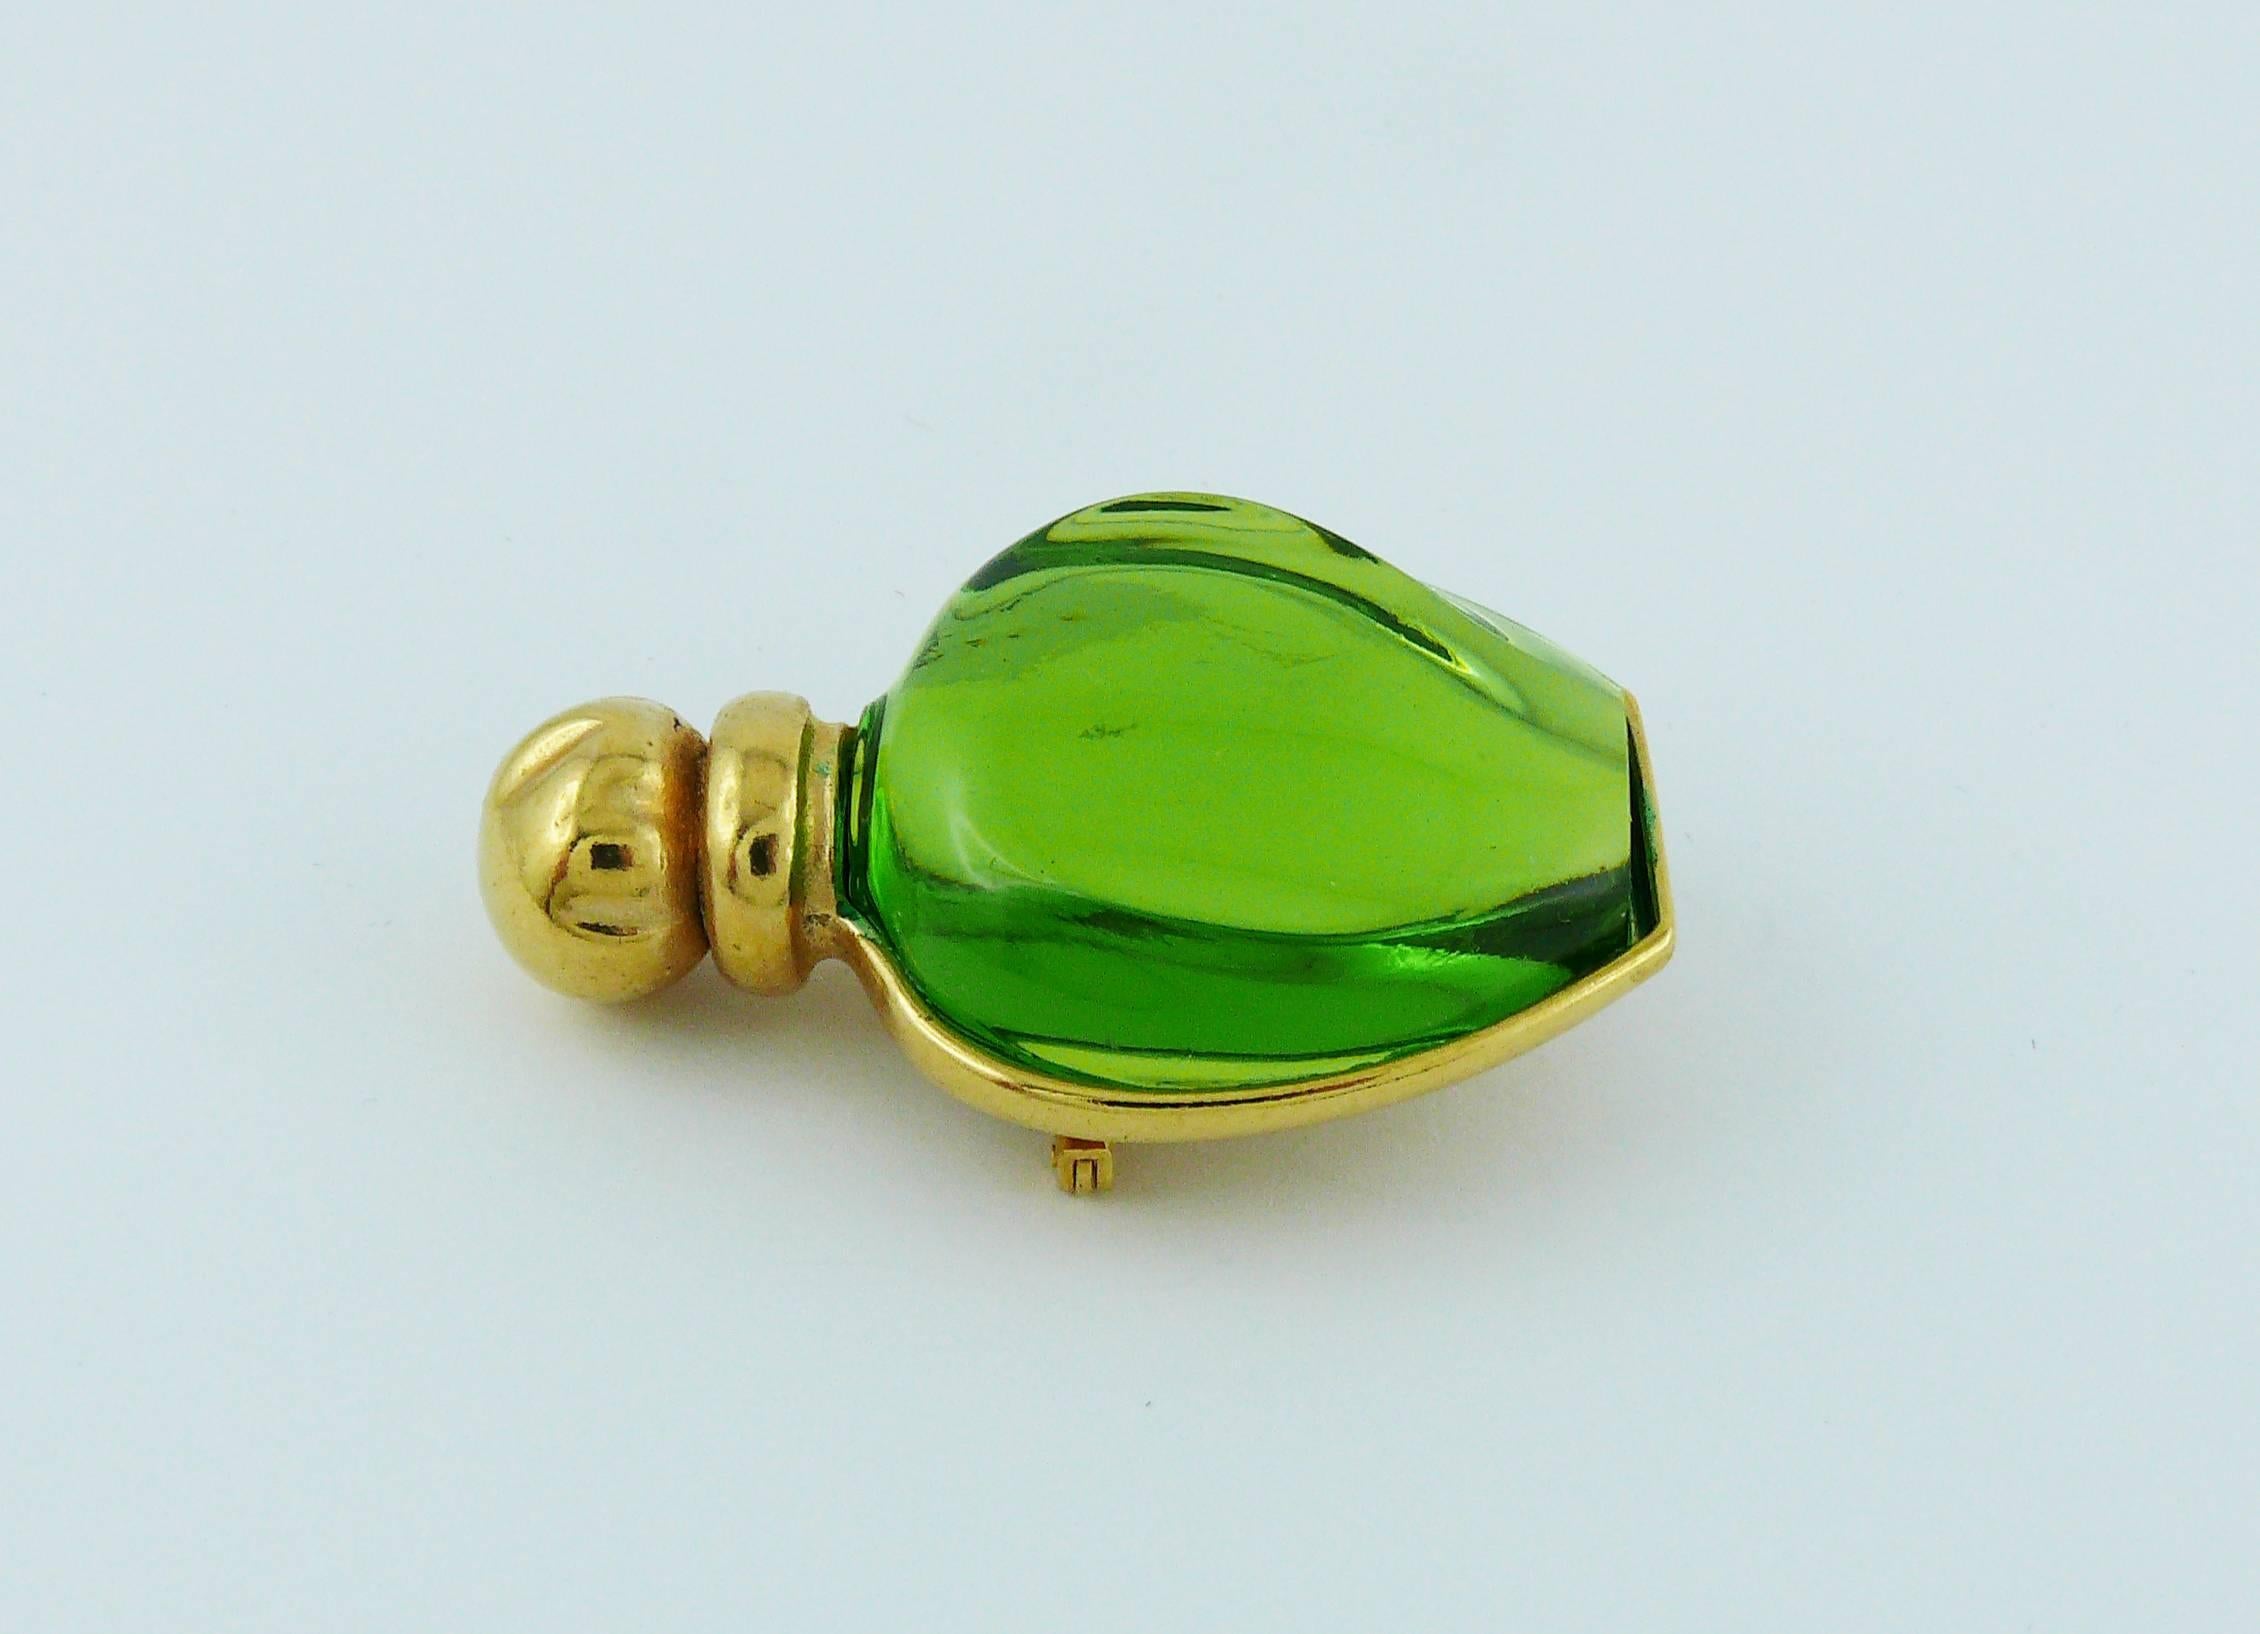 CHRISTIAN DIOR vintage "POISON" bottle brooch featuring a green resin cabochon in a gold toned setting.

Marked CHRISTIAN DIOR.

Indicative measurements : max. height approx. 4.5 cm (1.77 inches) / max. width approx. 3 cm (1.18